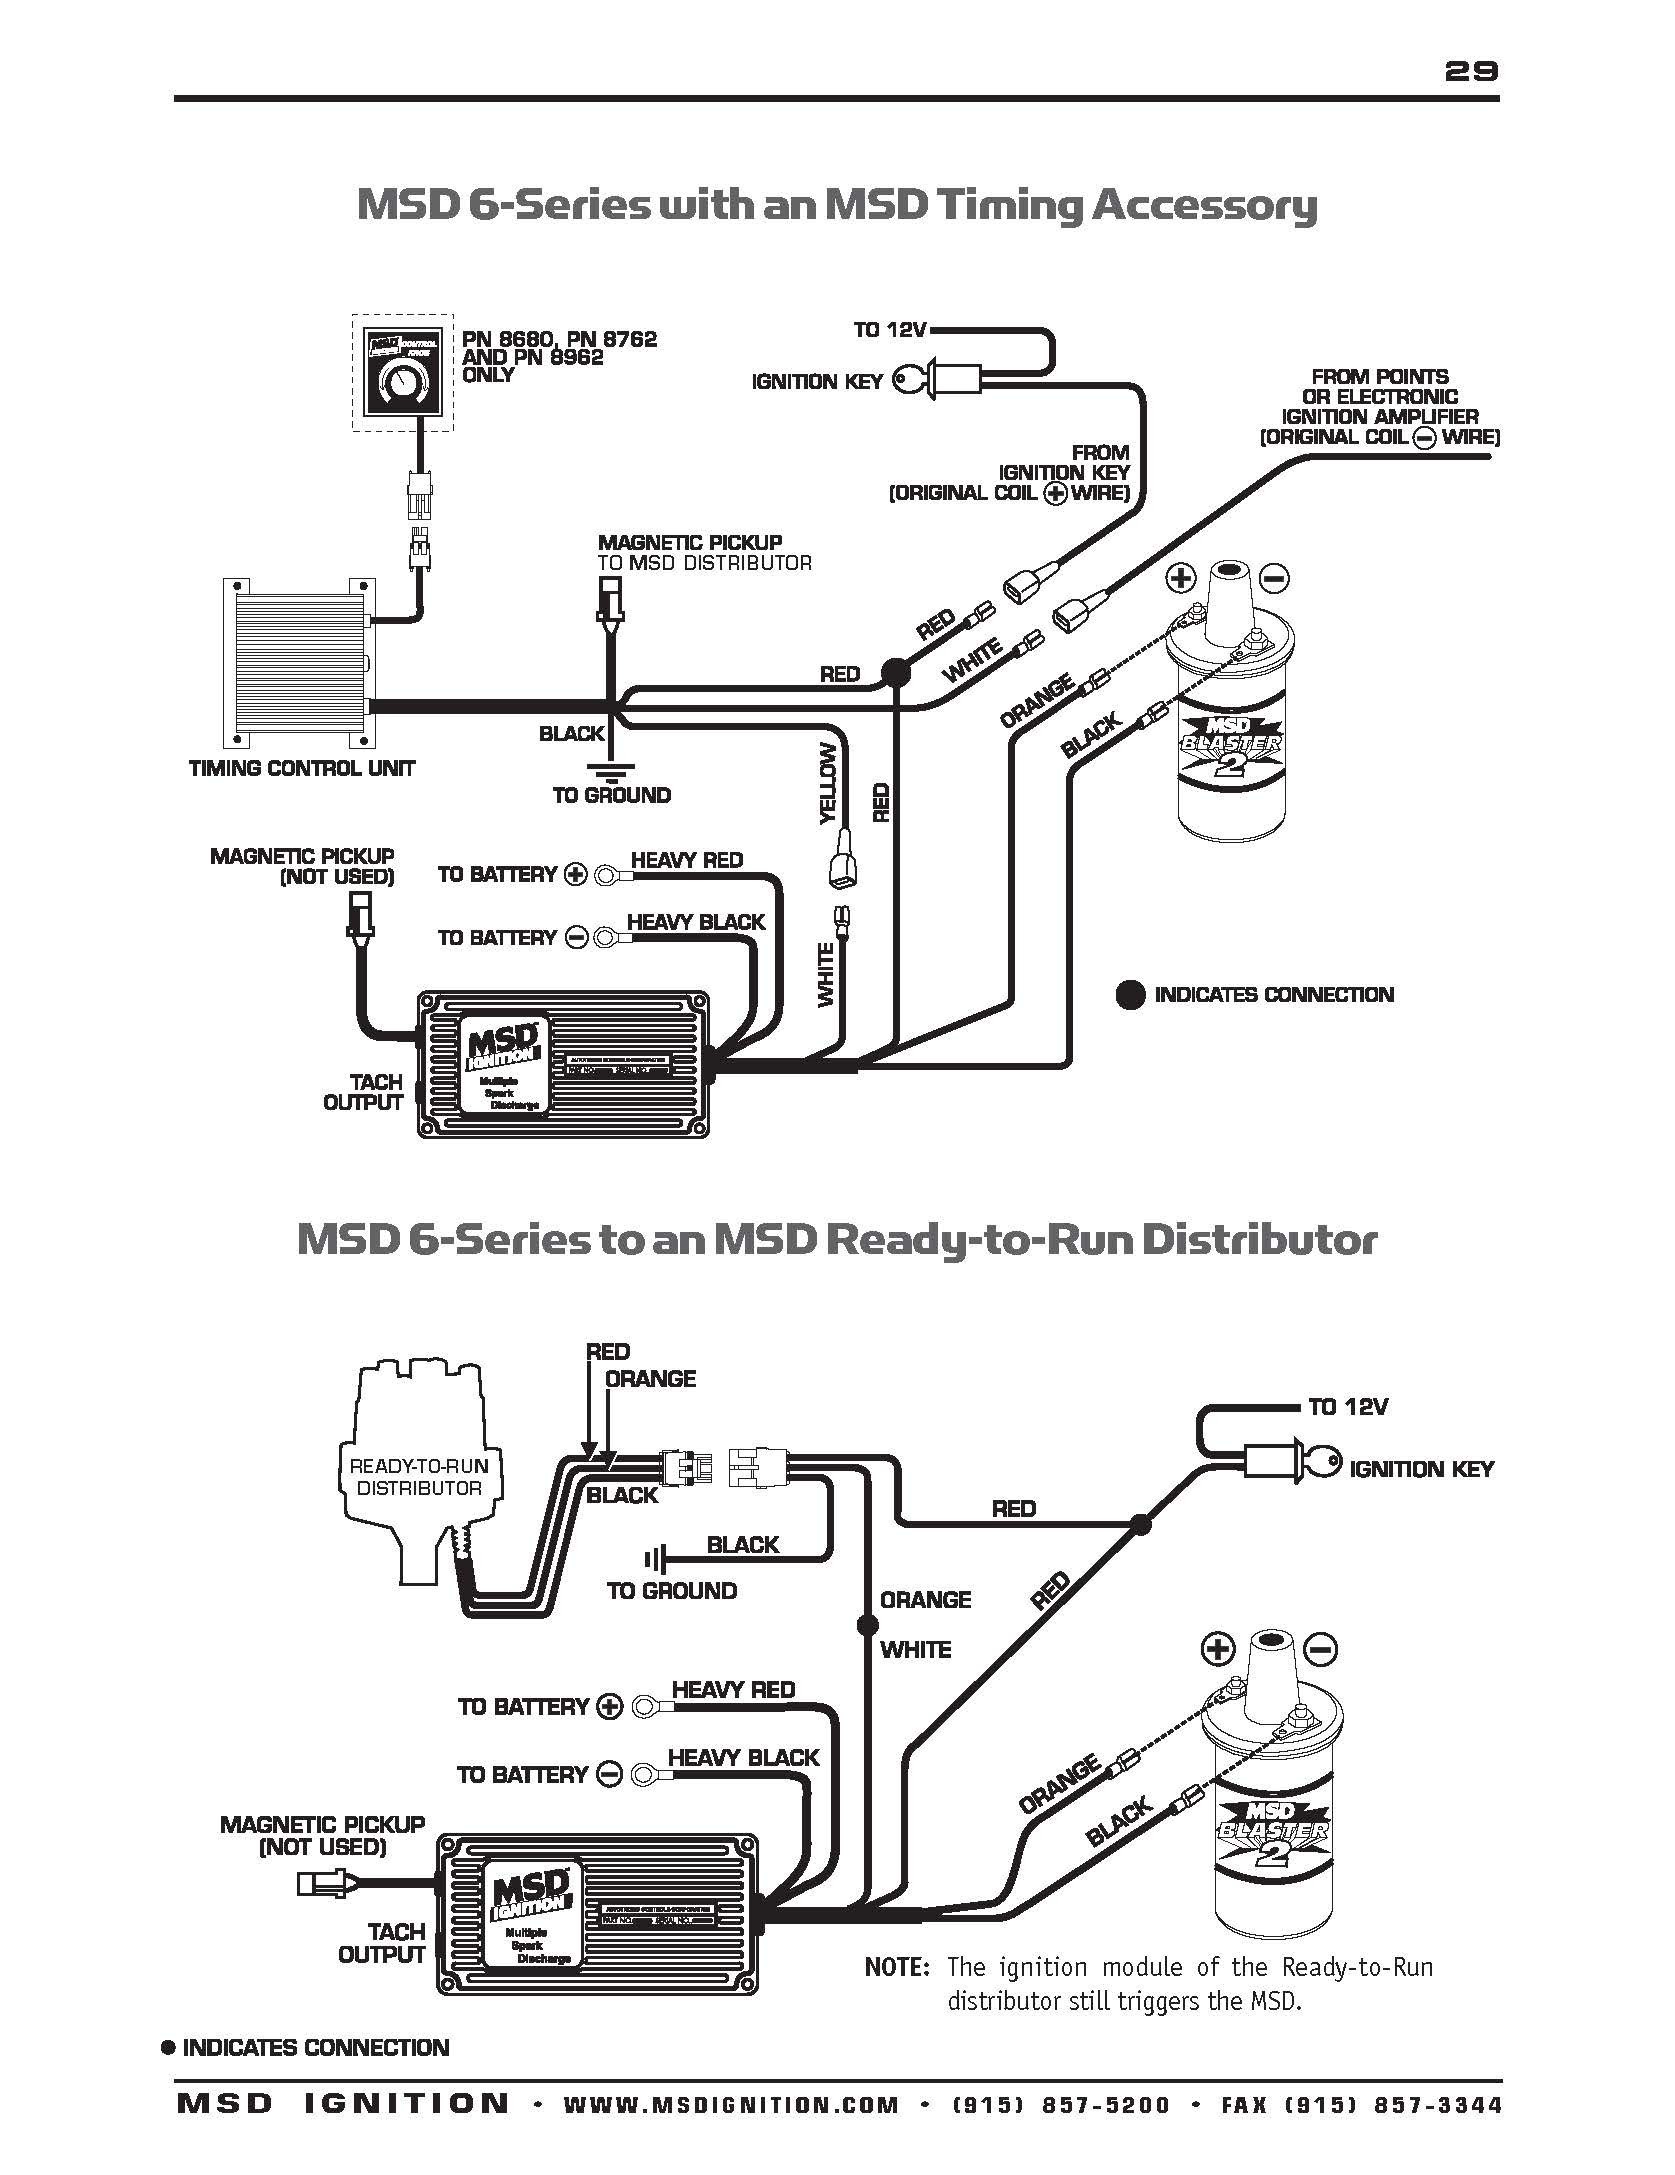 Wiring Diagram Electronic Ignition System Inspirationa Msd Ignition System Wiring Diagram New Msd Ignition Wiring Diagrams